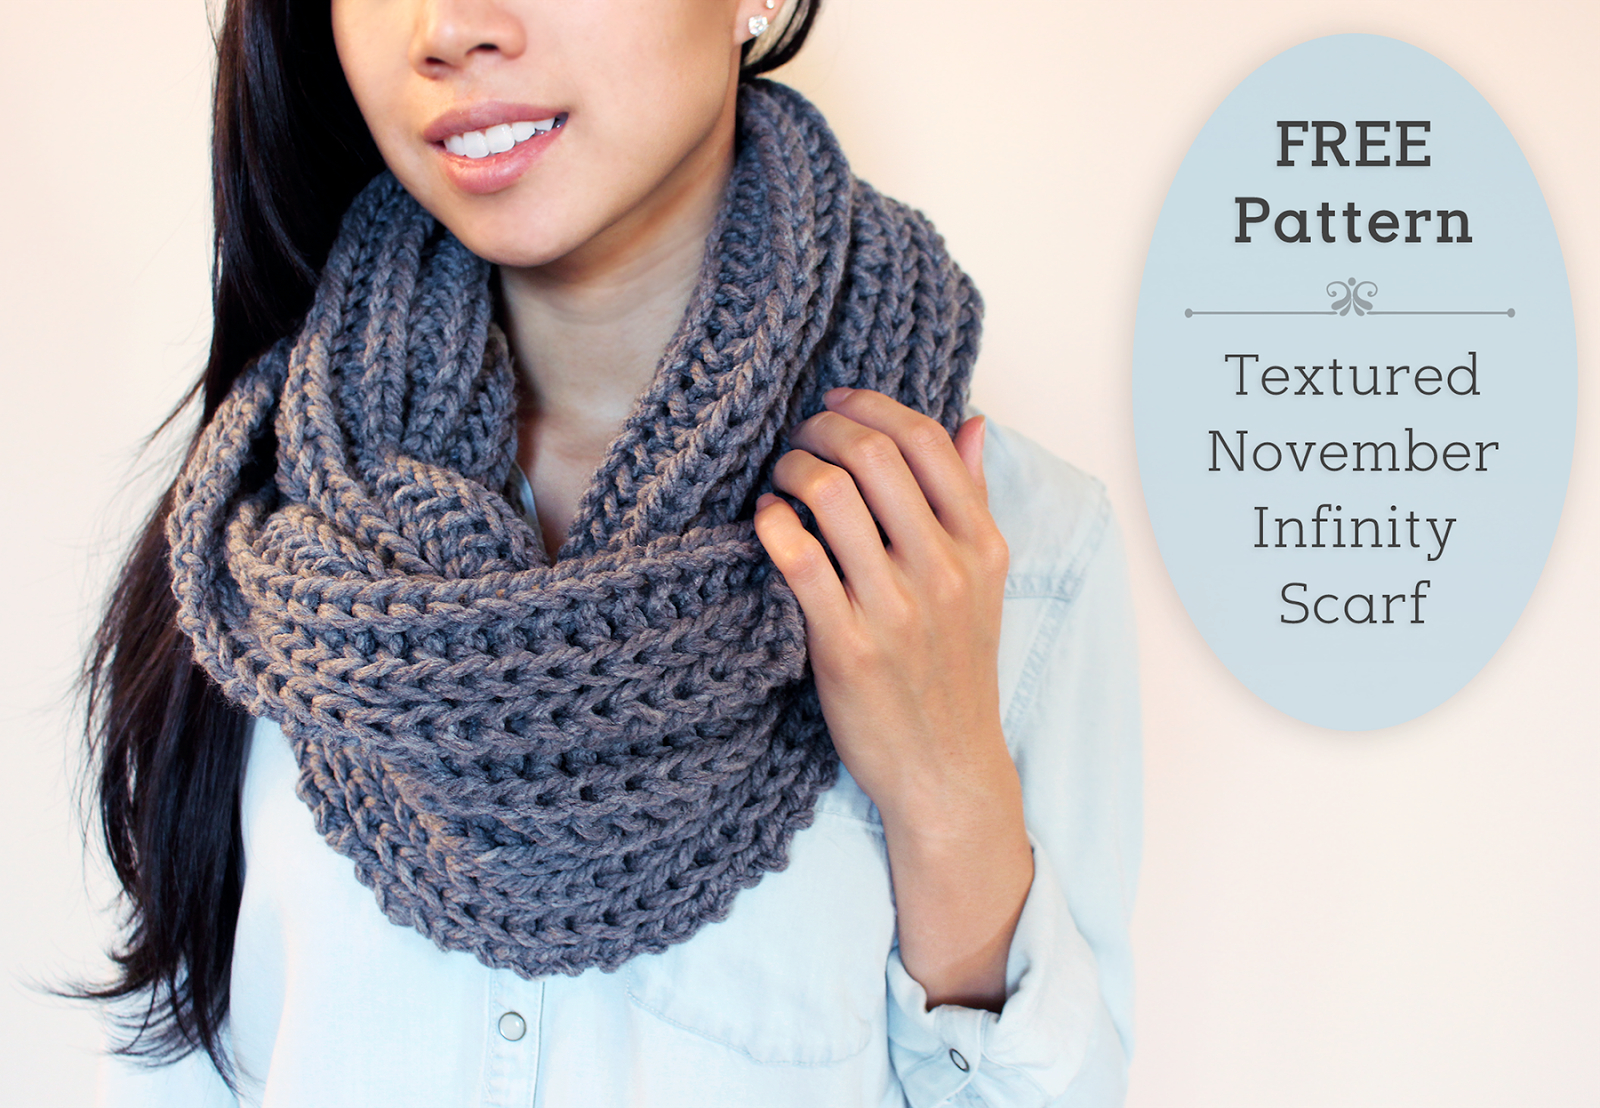 Knitting Scarf Pattern For Beginners Free Chunky Scarf Knitting Patterns For Beginners Crochet And Free